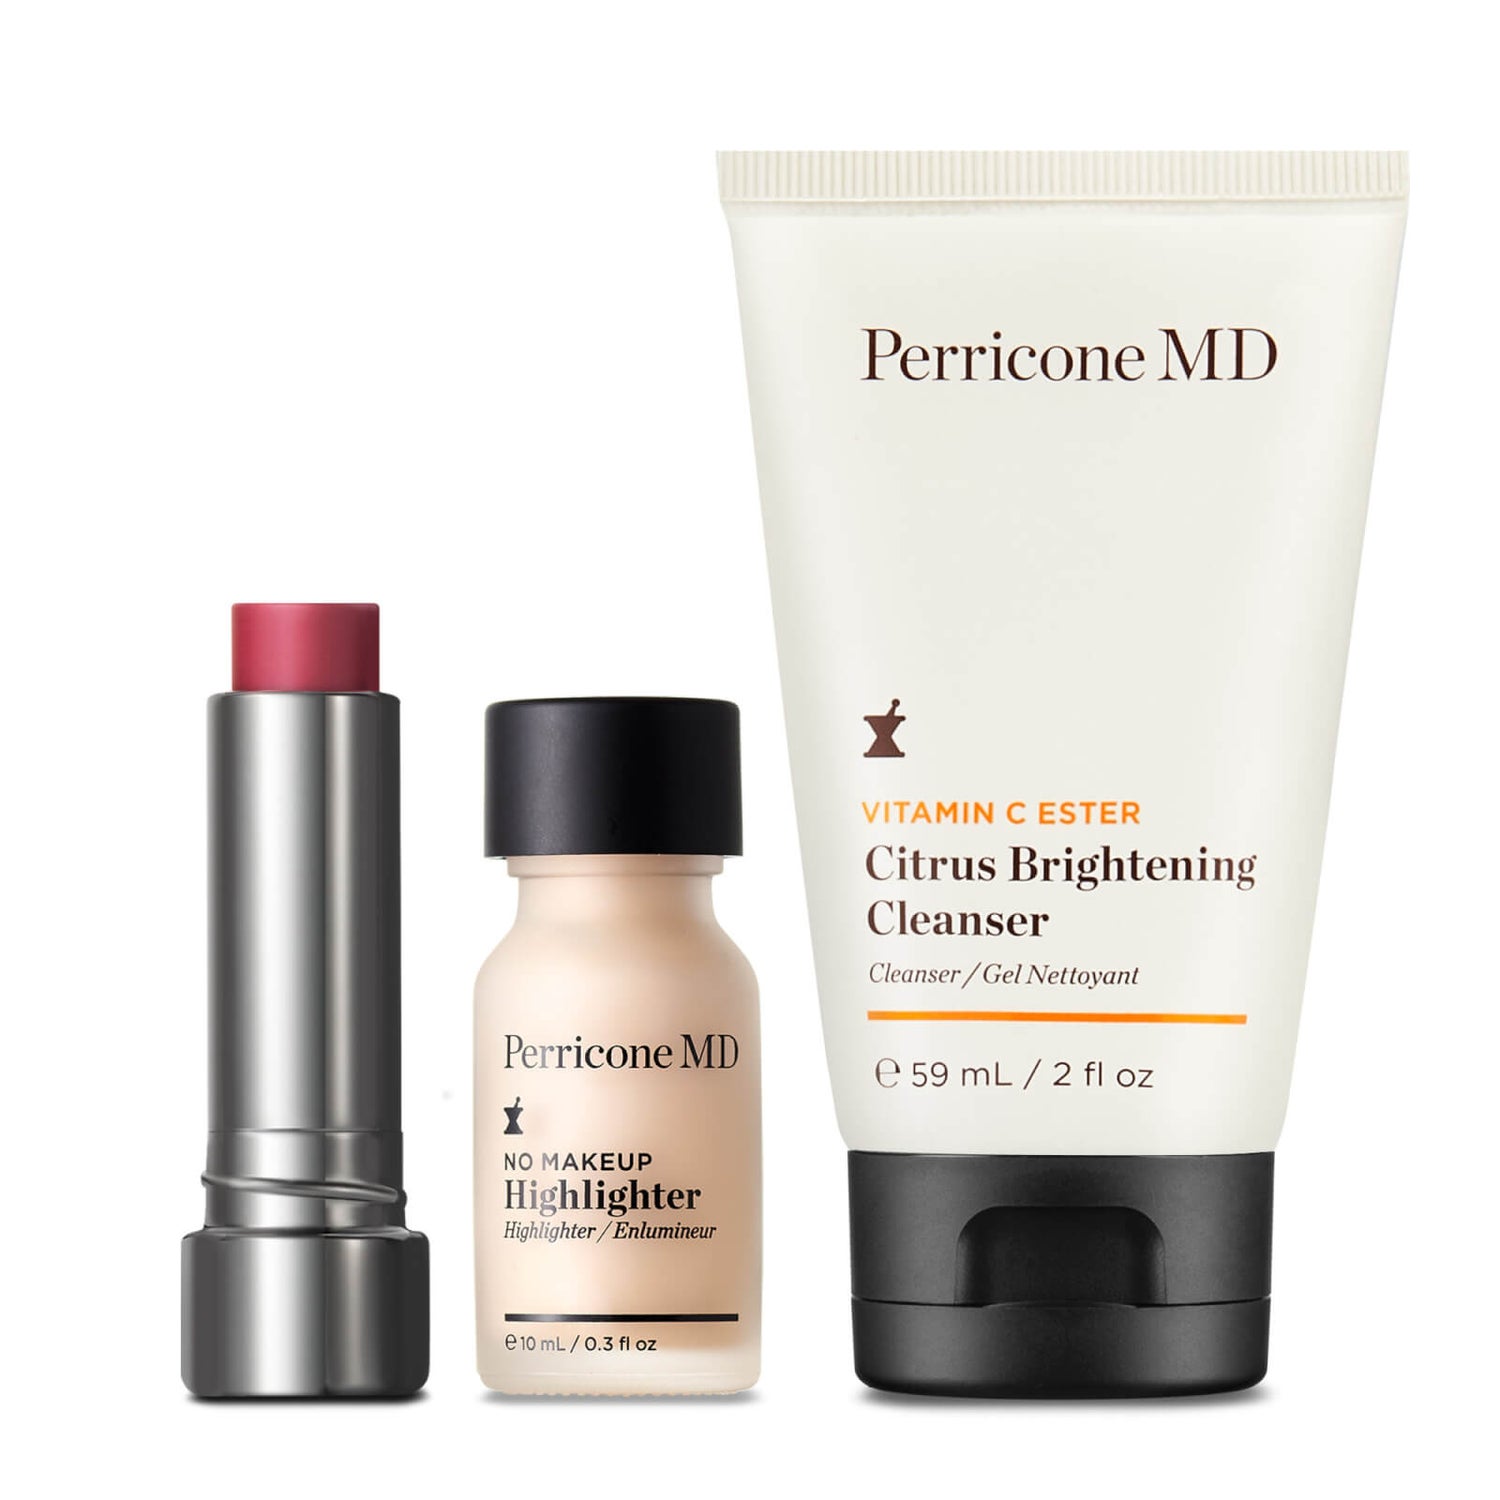 Perricone MD Glow On The Go Set